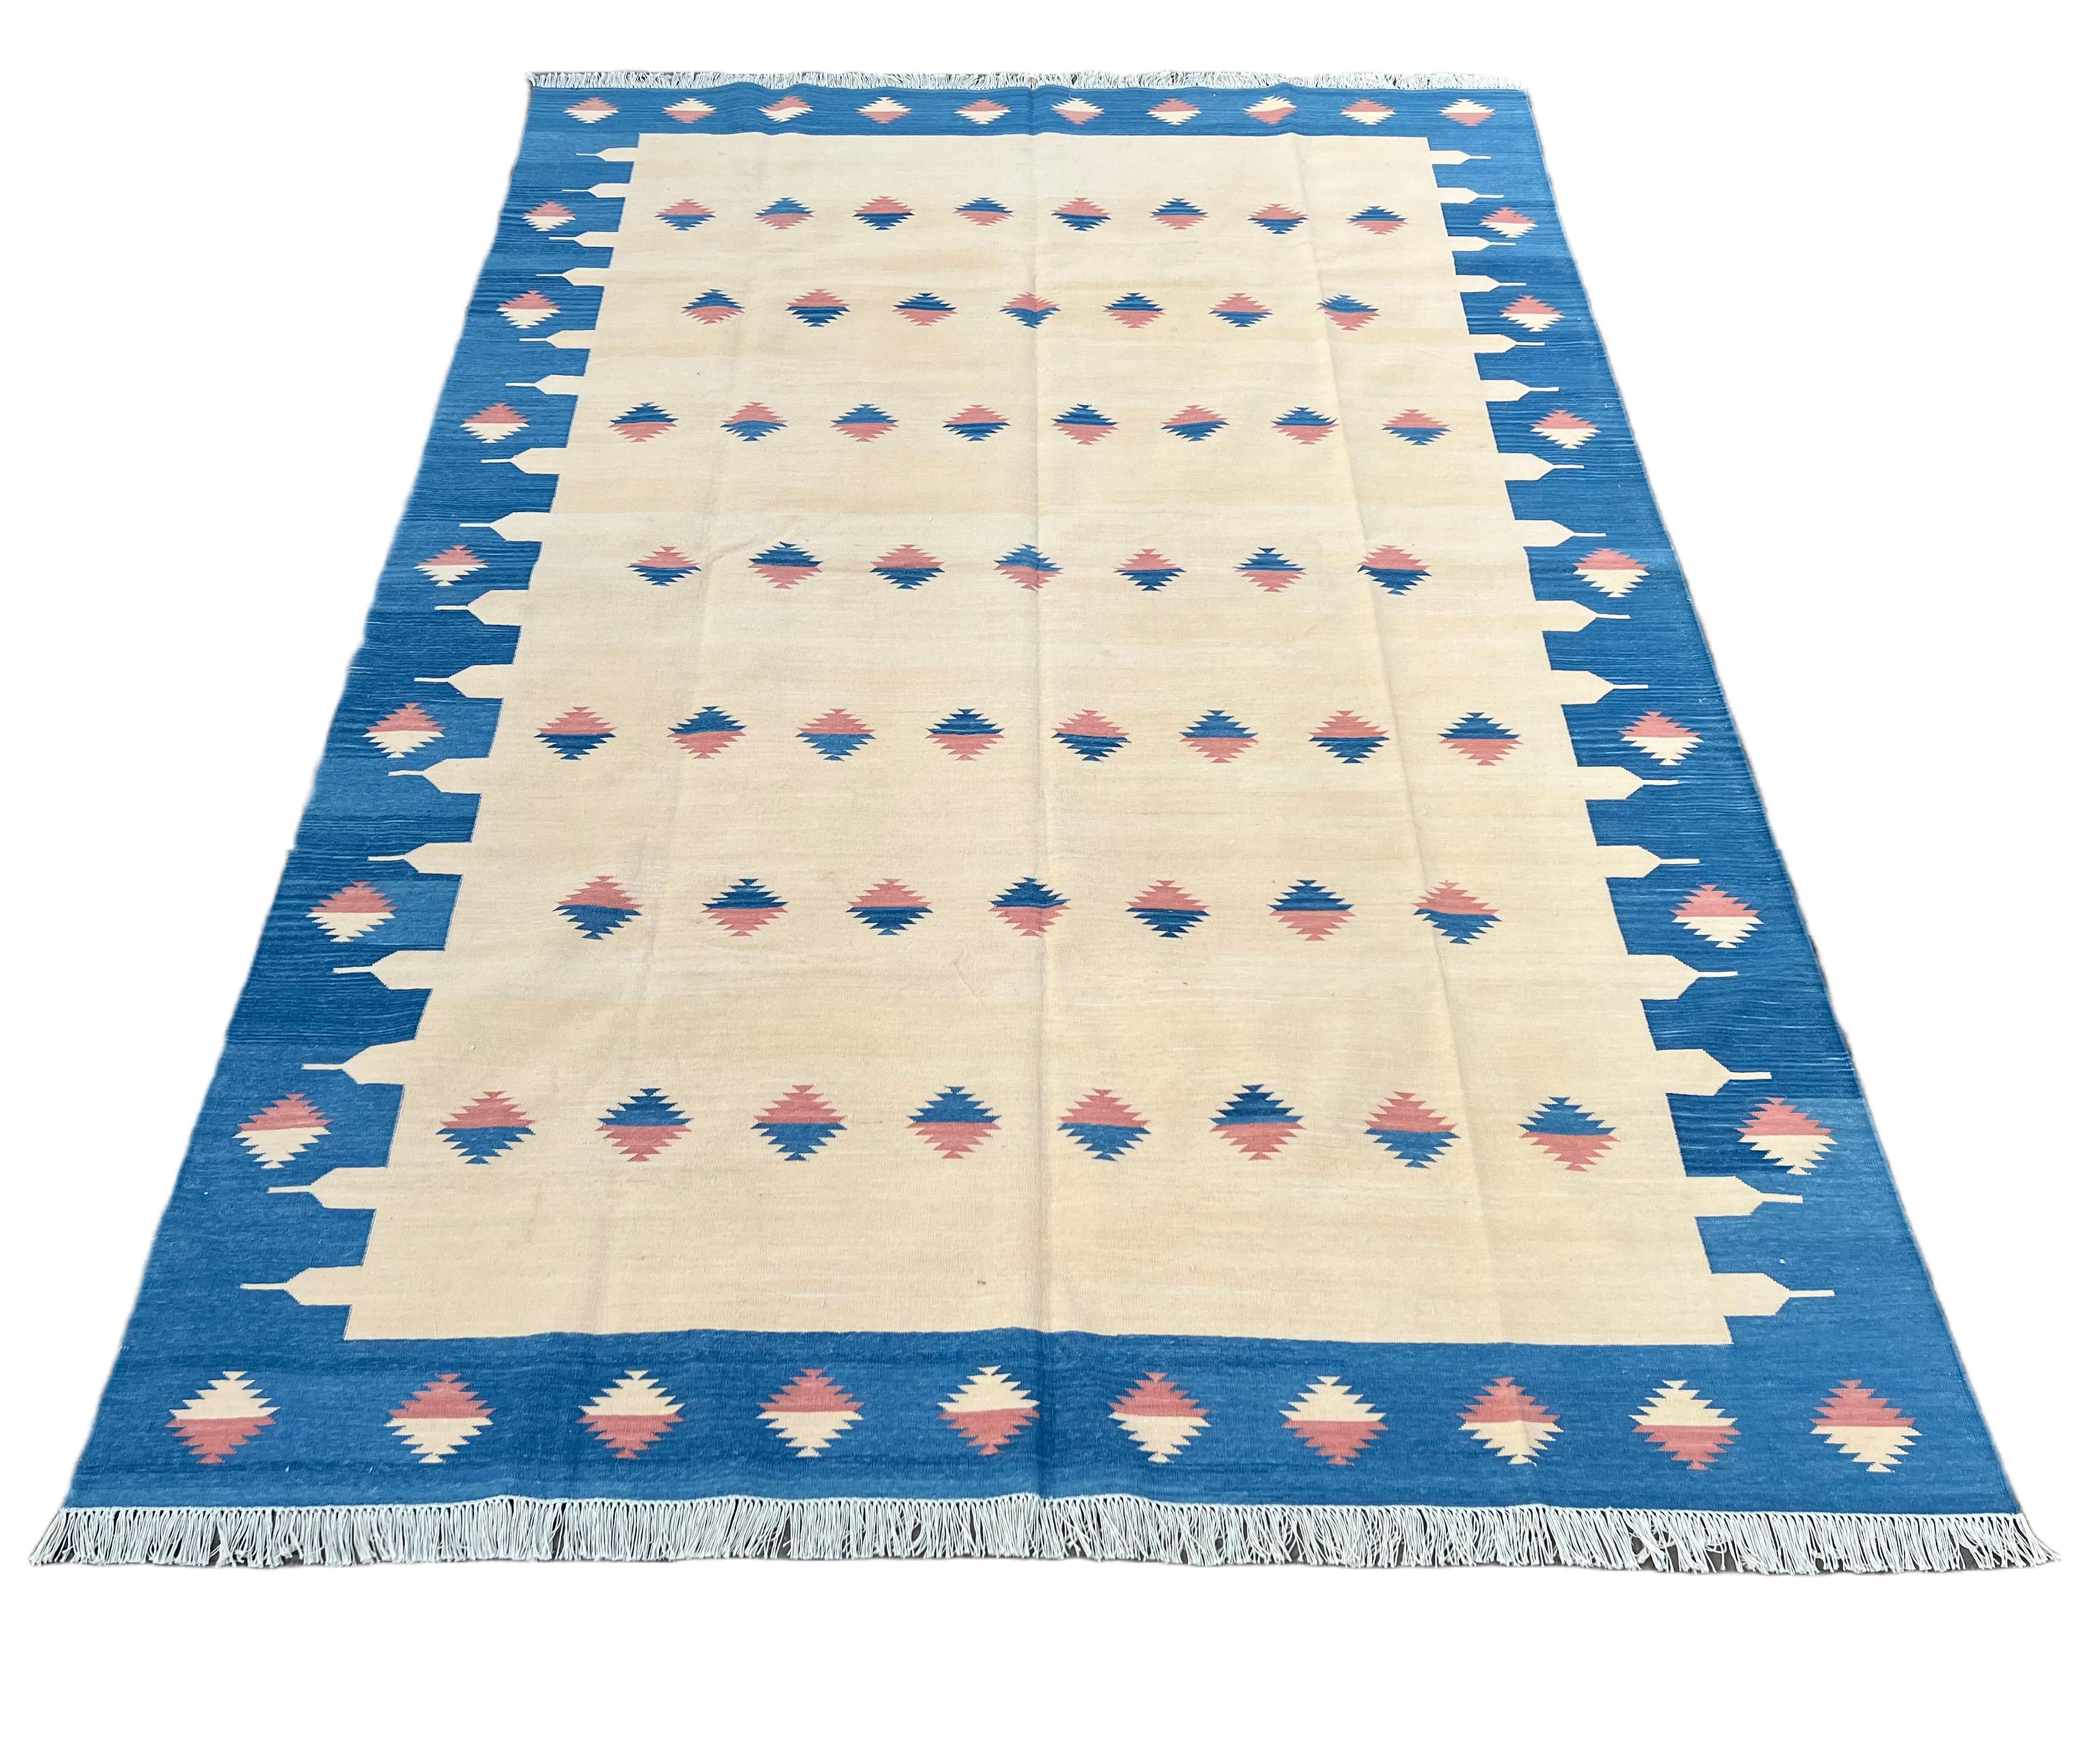 Contemporary Handmade Cotton Area Flat Weave Rug, 6x9 Cream And Blue Diamond Indian Dhurrie For Sale